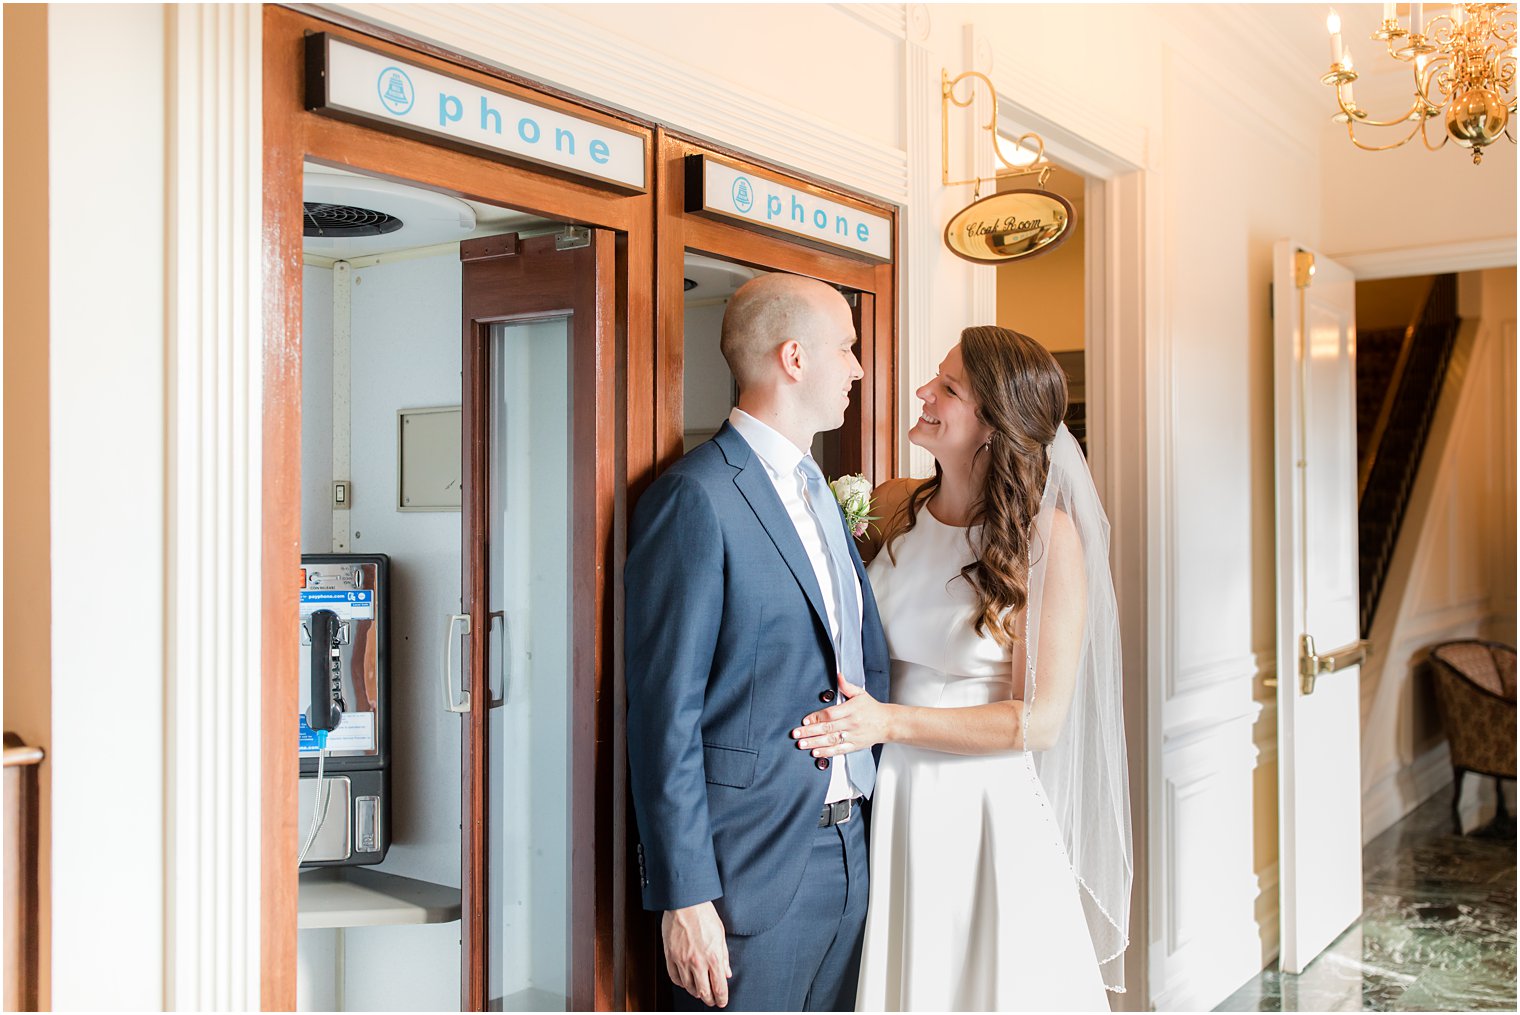 bride and groom pose by old telephone booth in Molly Pitcher Inn